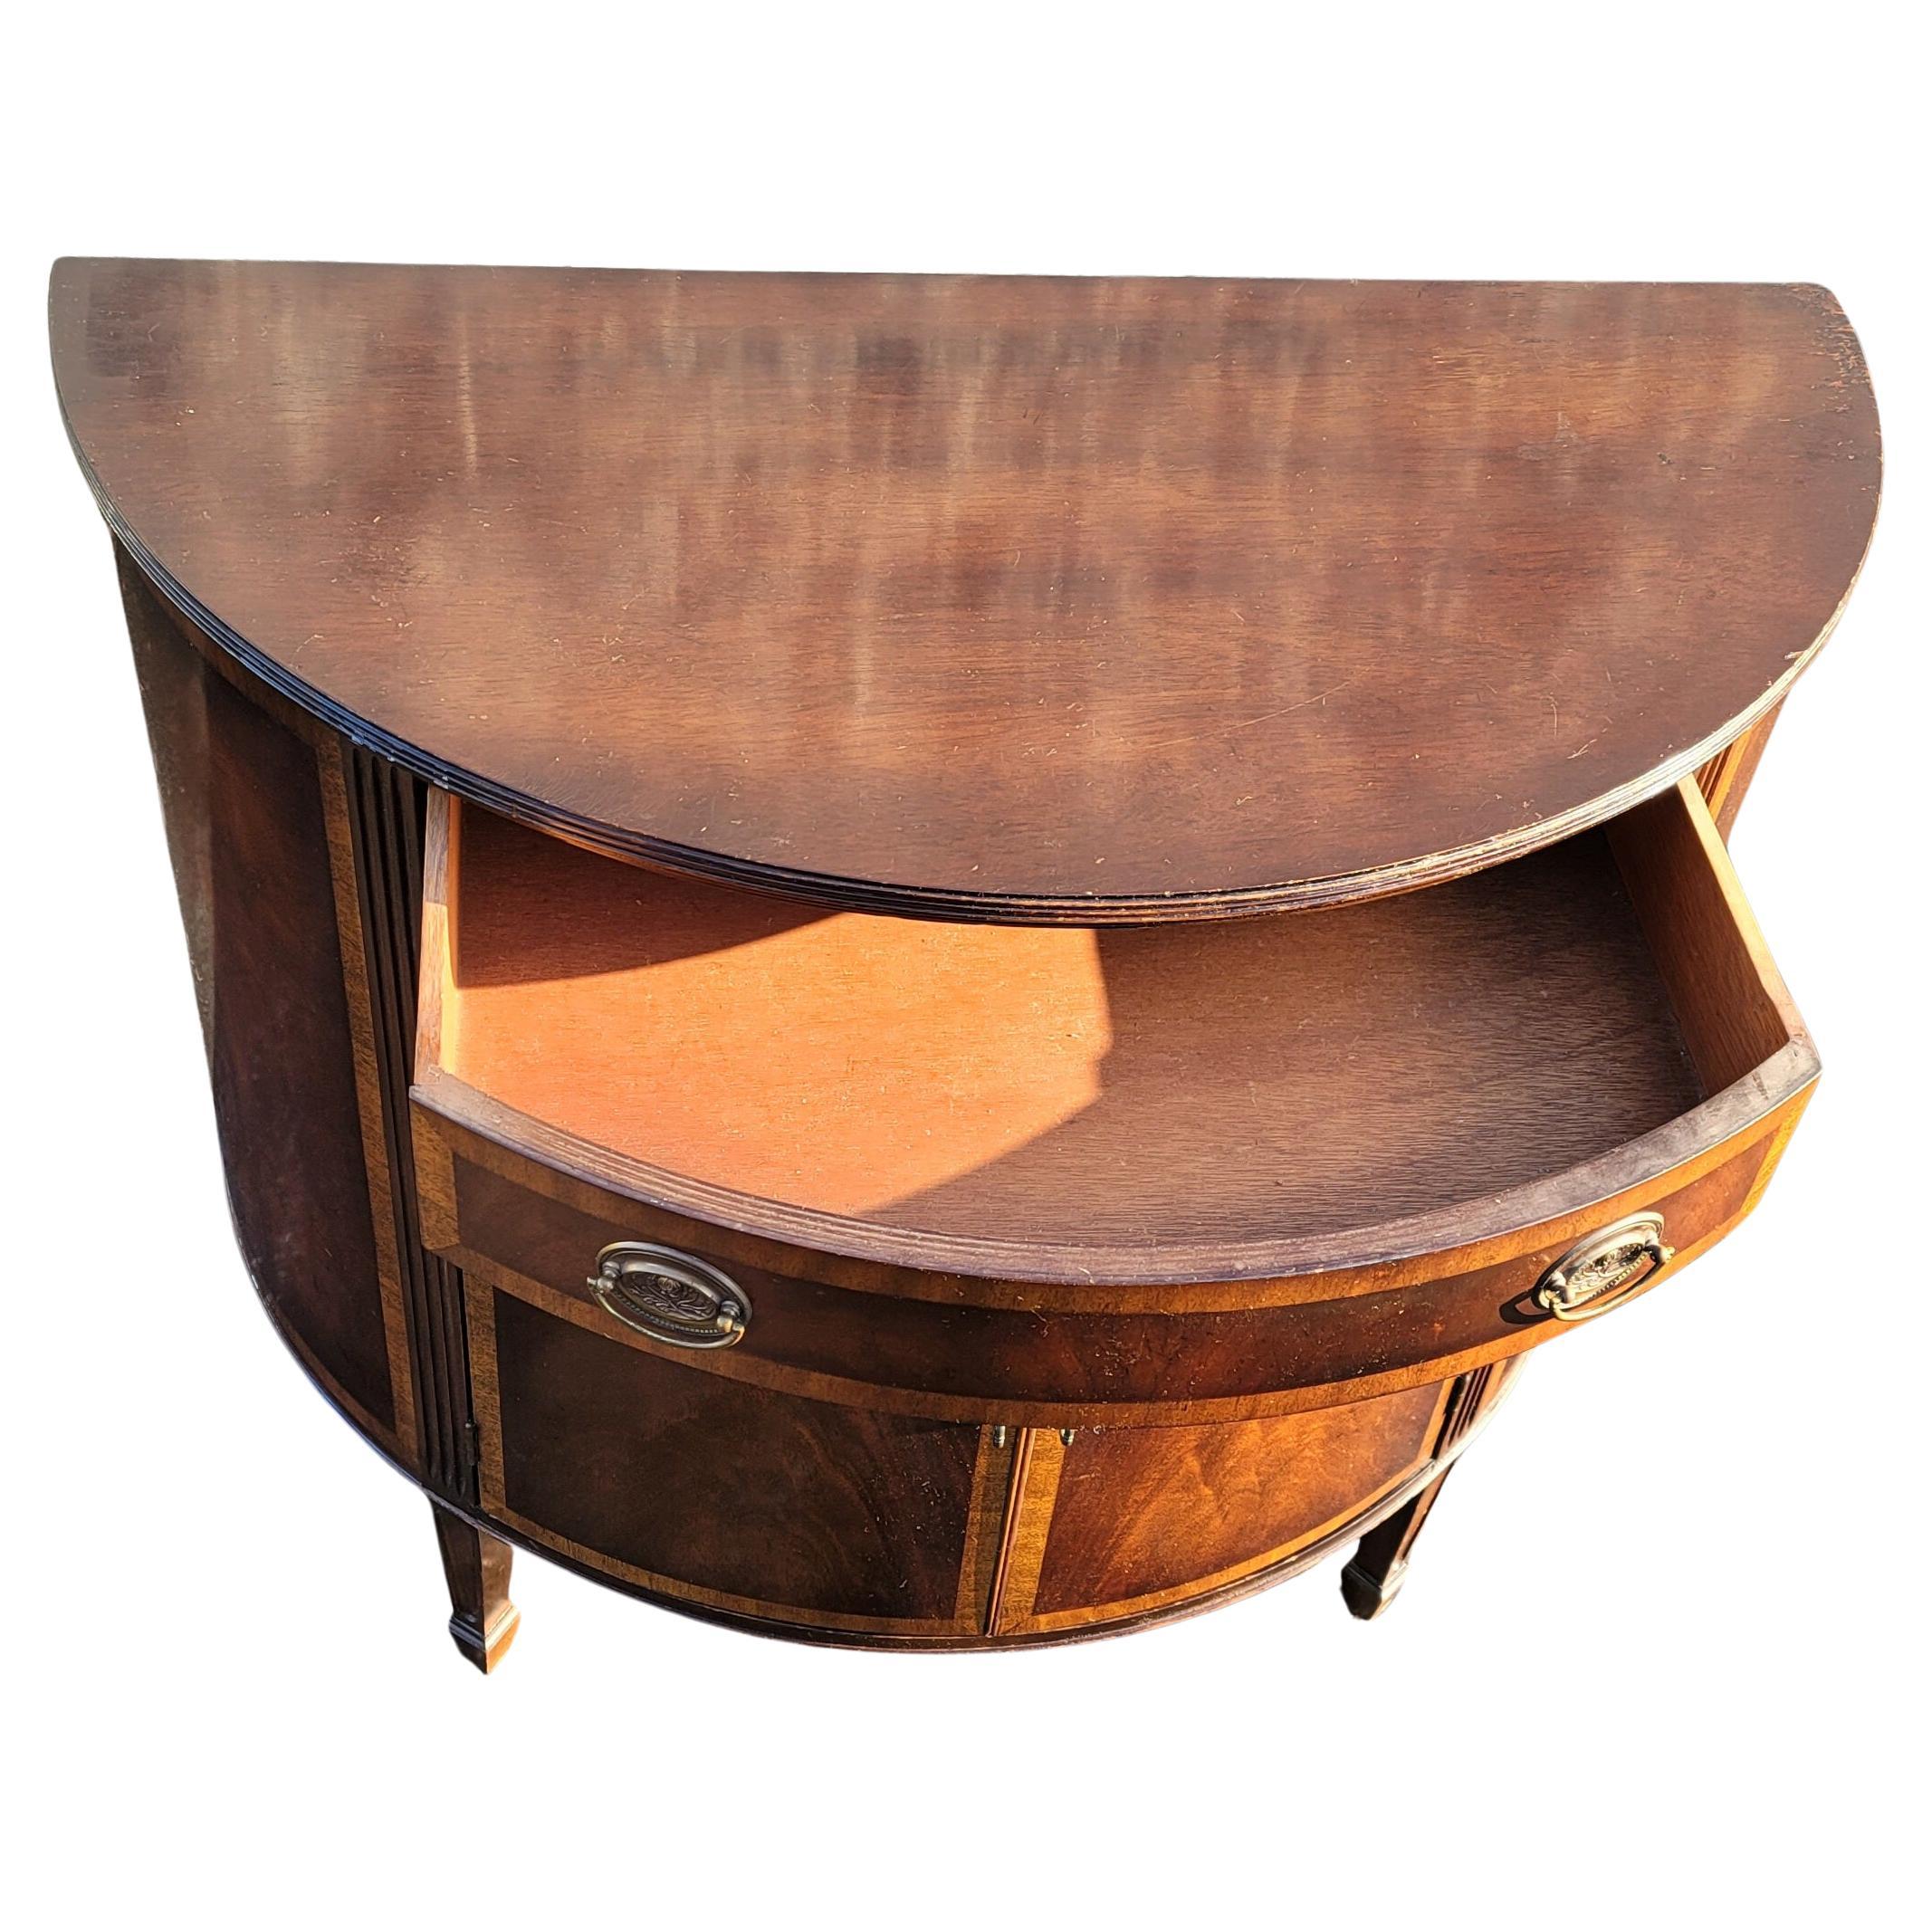 19th Century Mid-19th Centruty George III Demilune Banded Flame Mahogany Commodes Cabinets